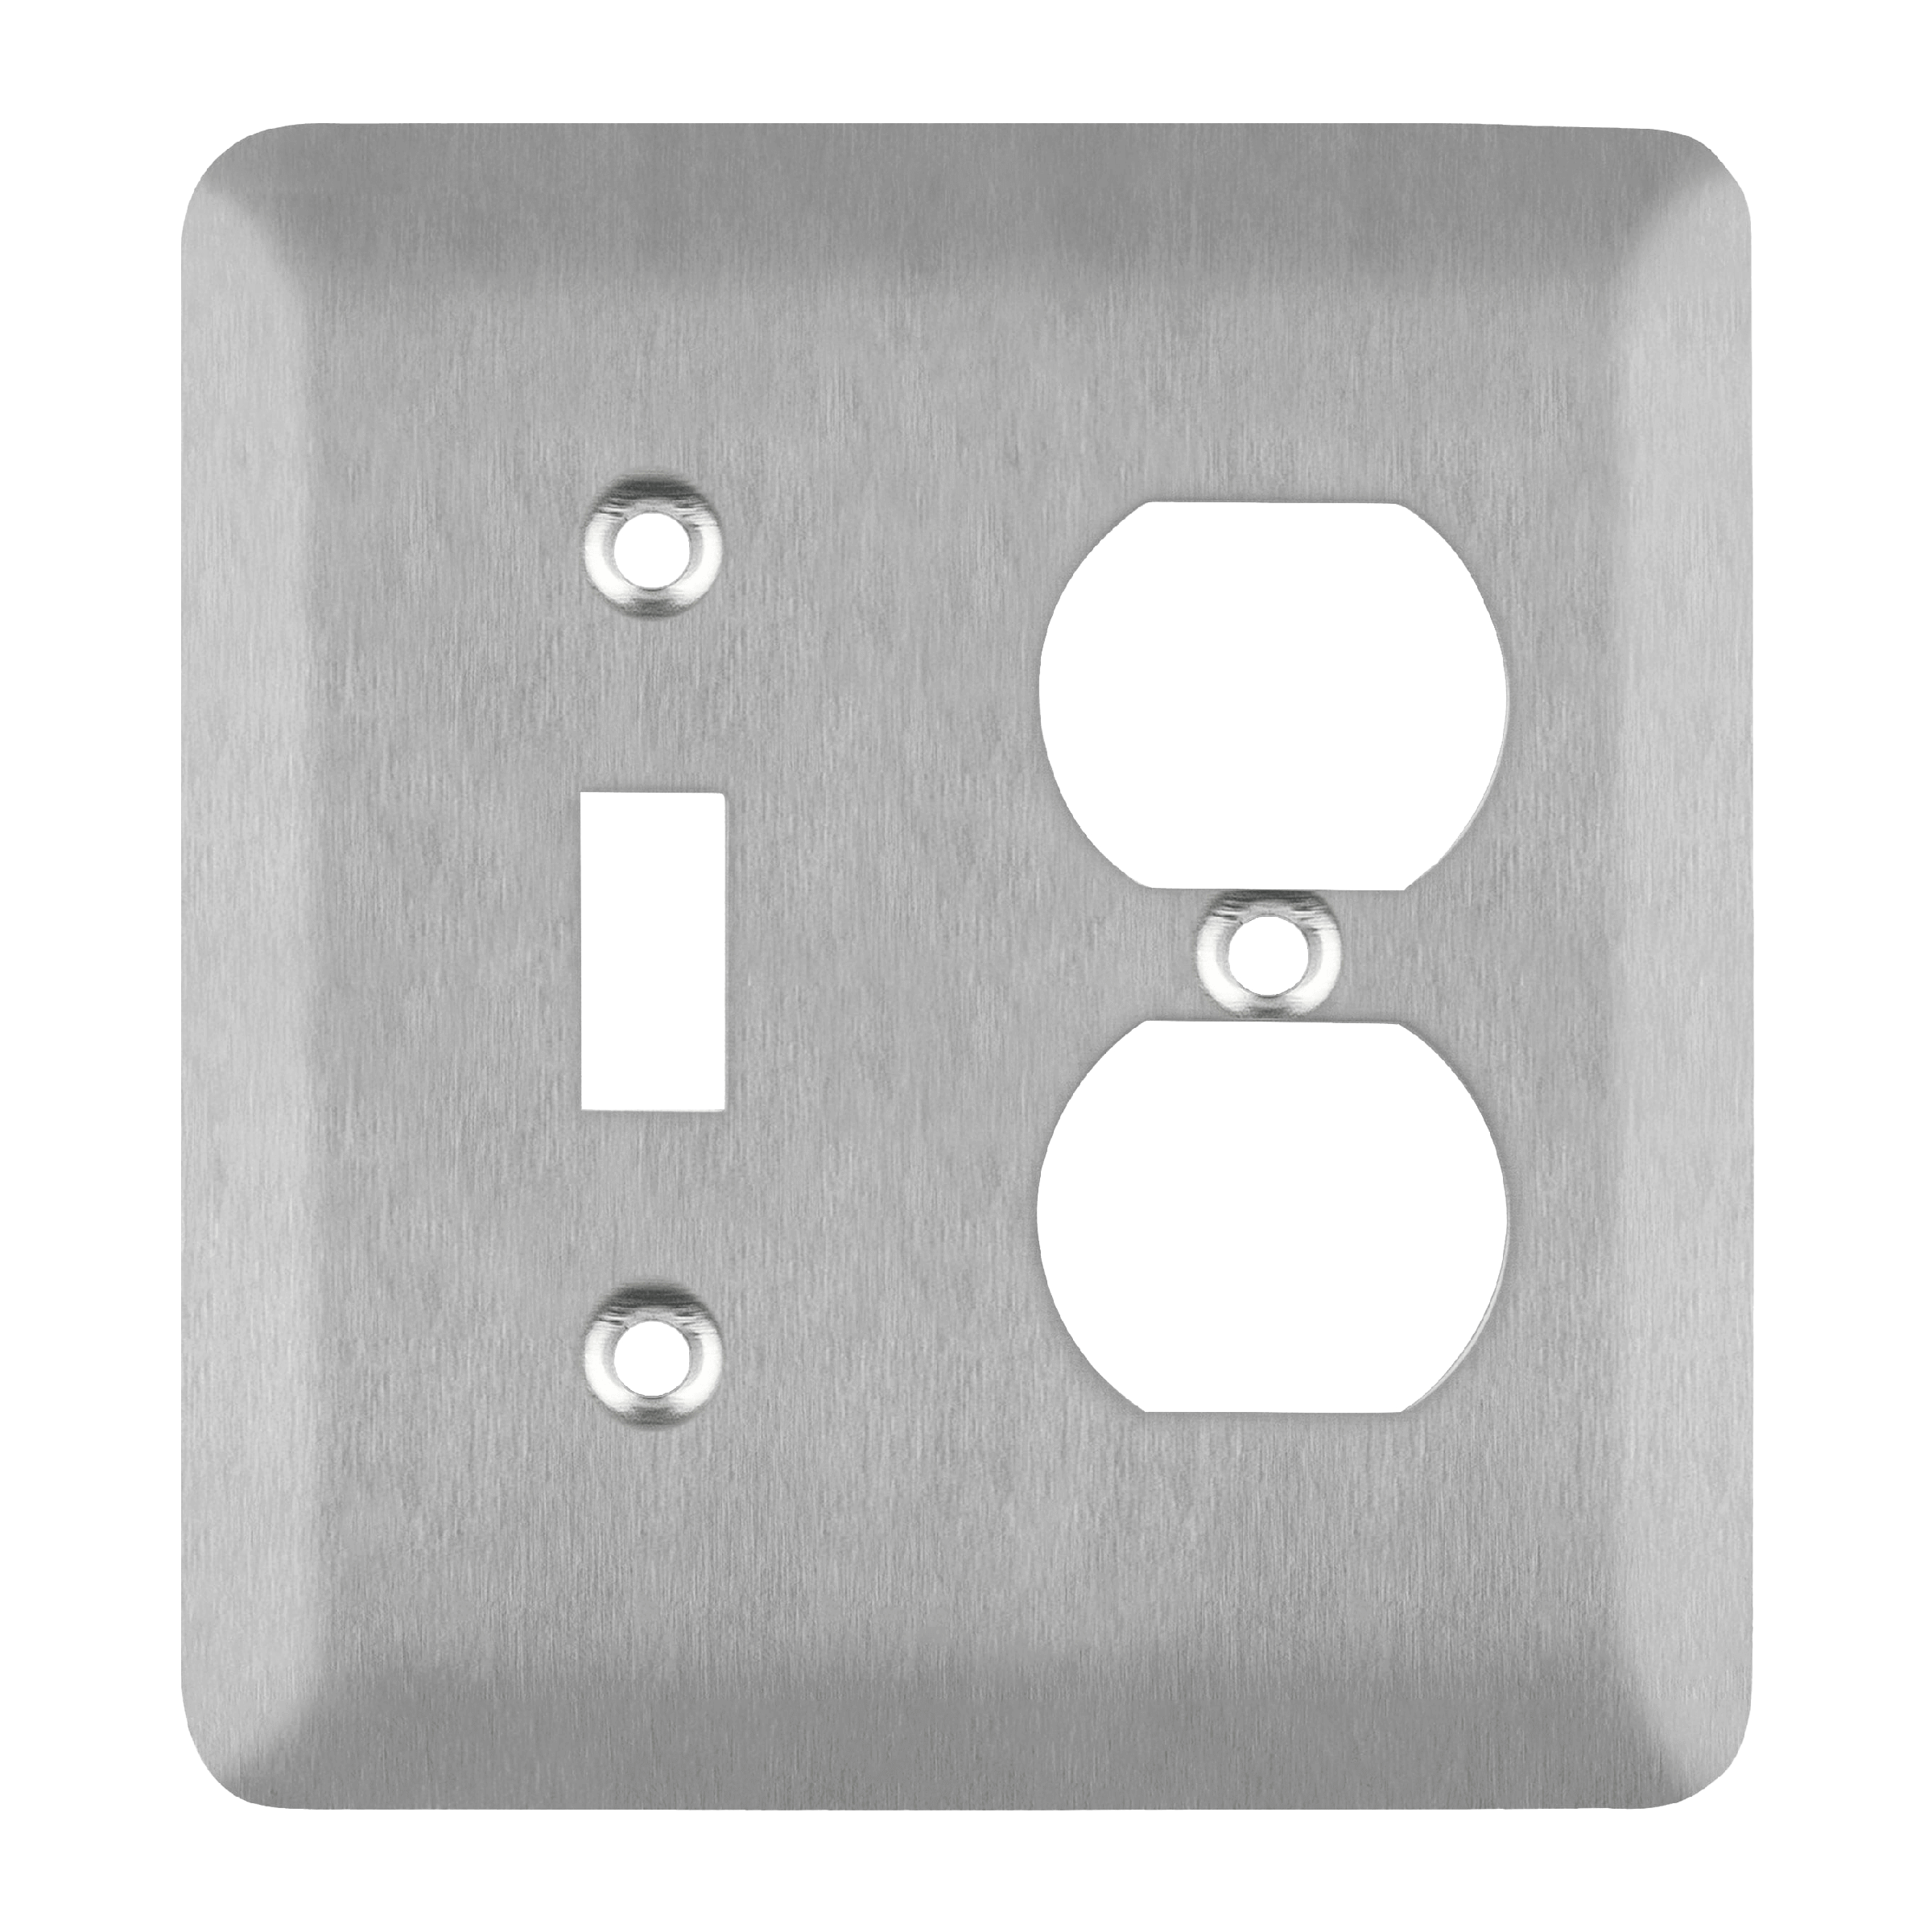 Combination Toggle Switch and Duplex Receptacle Metal Wall Plate